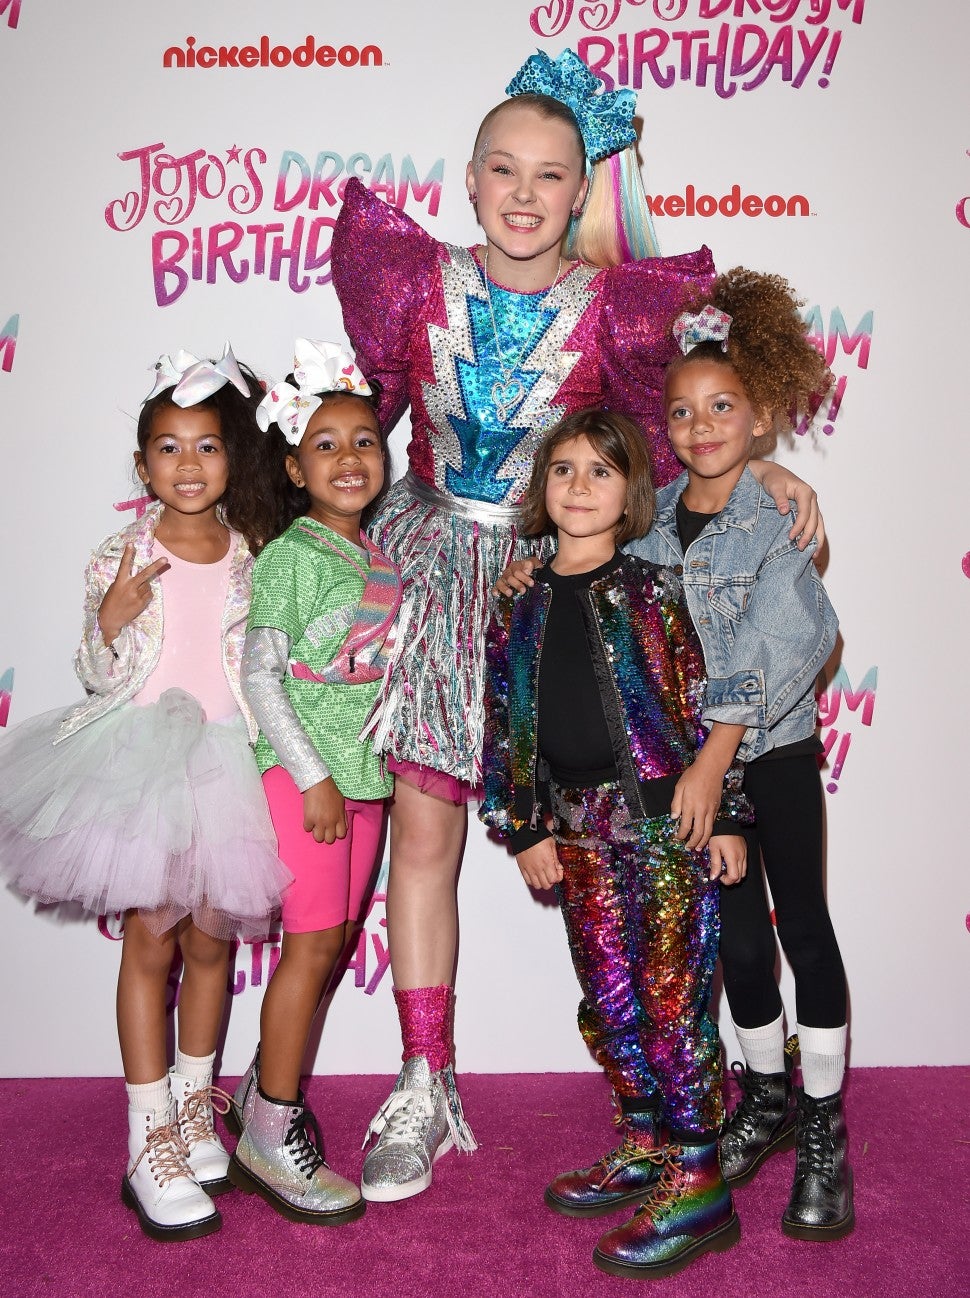 Ryan Romulus, North West, JoJo Siwa, Penelope Disick and guest attend JoJo Siwa's Sweet 16 Birthday celebration at W Hollywood on April 09, 2019 in Hollywood, California.